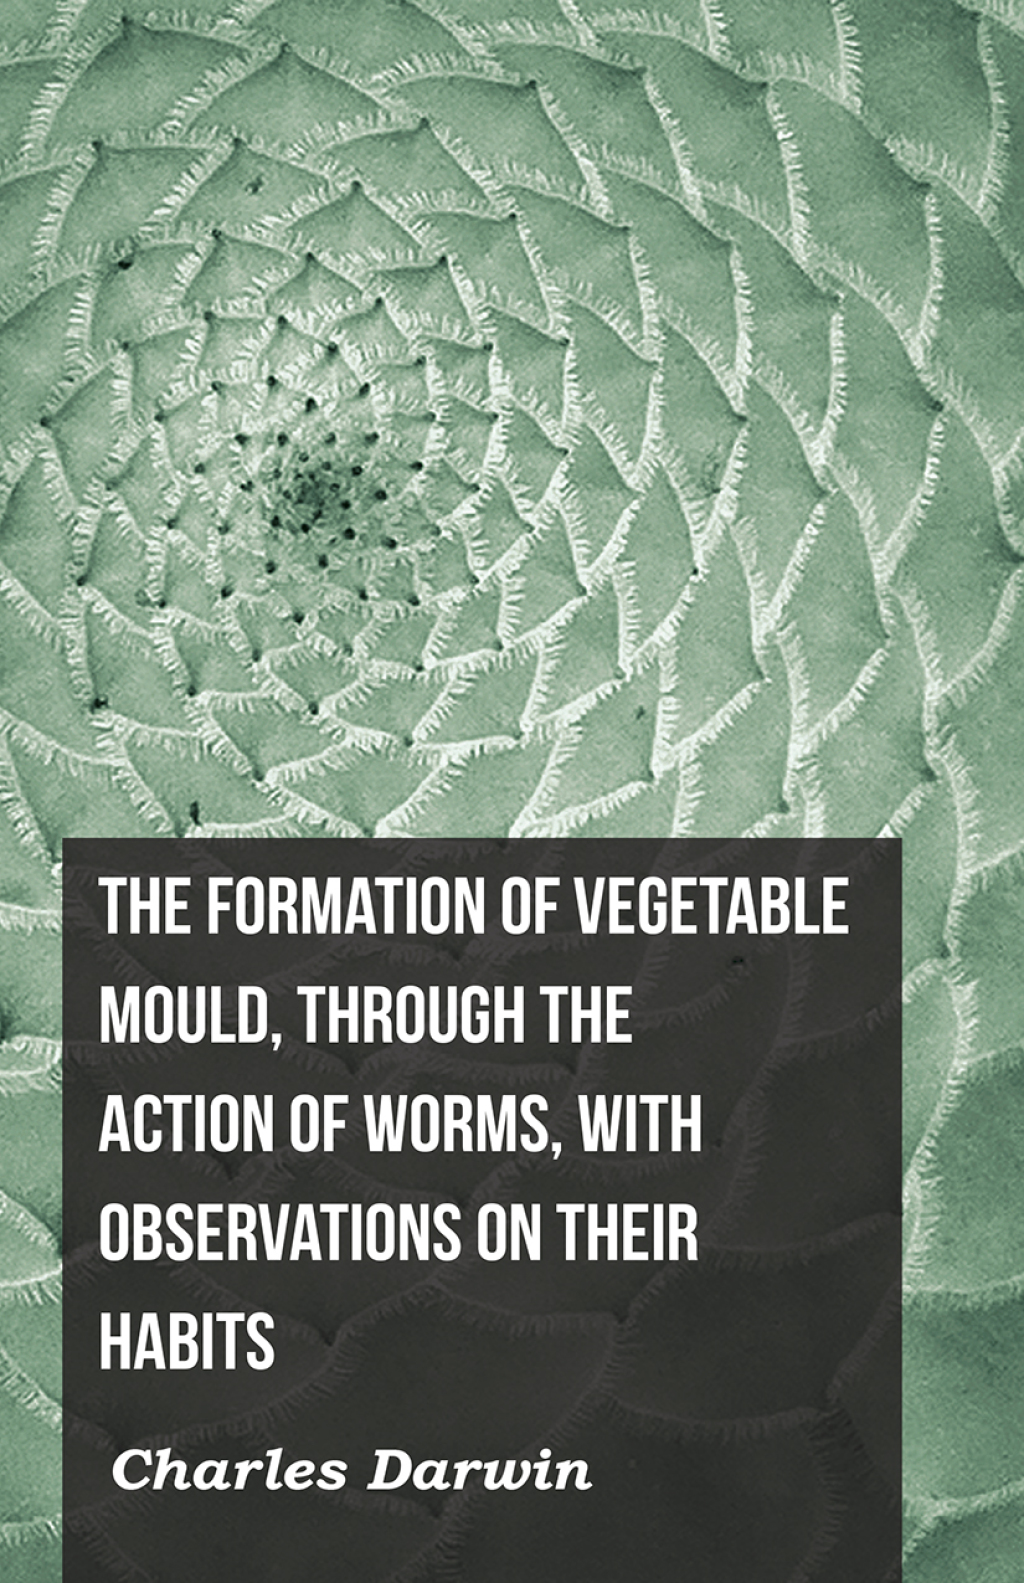 The Formation of Vegetable Mould  Through the Action of Worms  with Observations on Their Habits (eBook) - Charles Darwin,